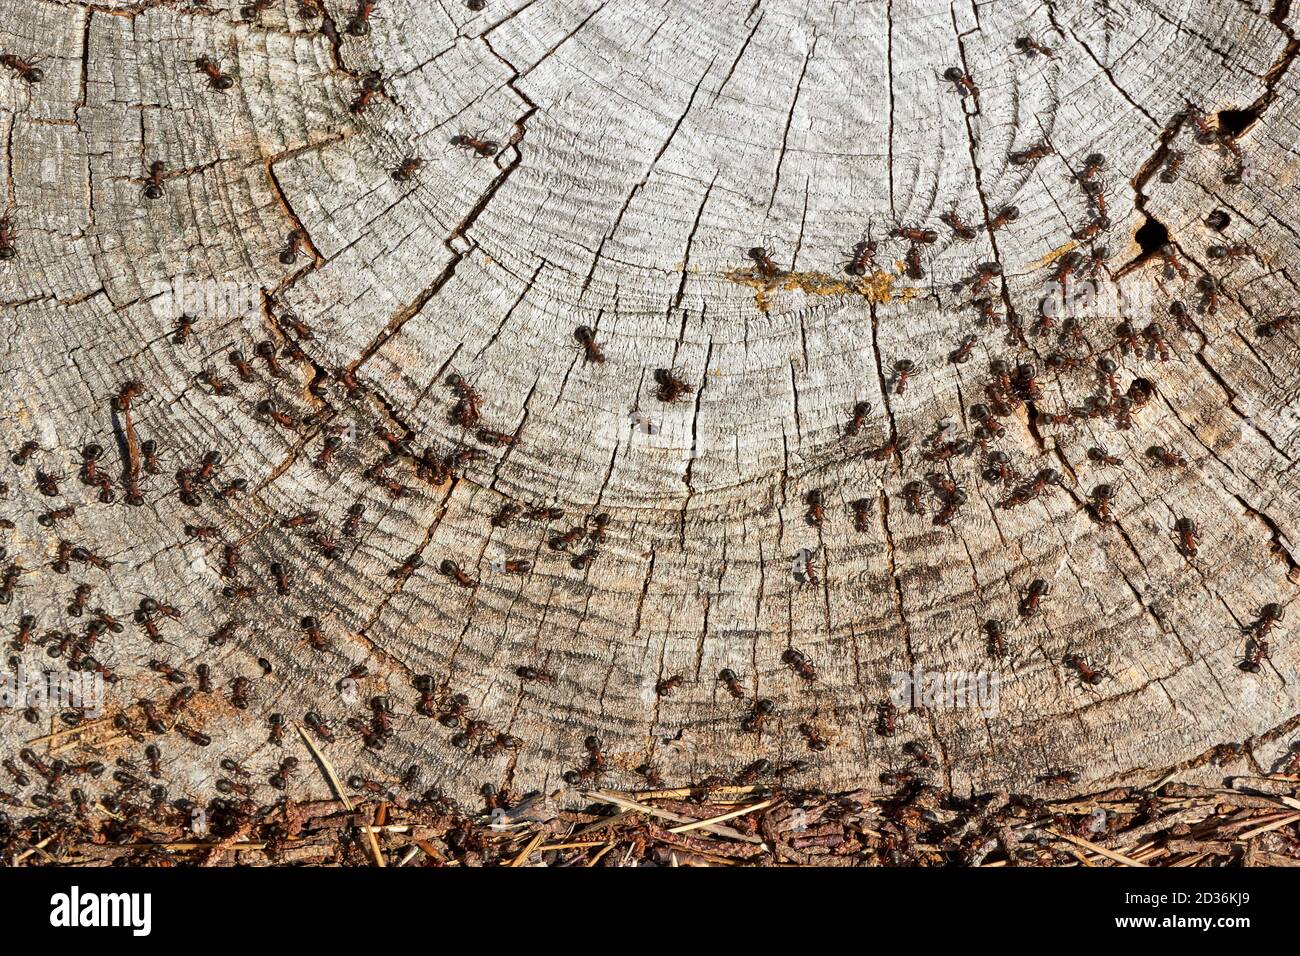 Red wood ants (Formica rufa) on cross-section of tree trunk; Denmark Stock Photo